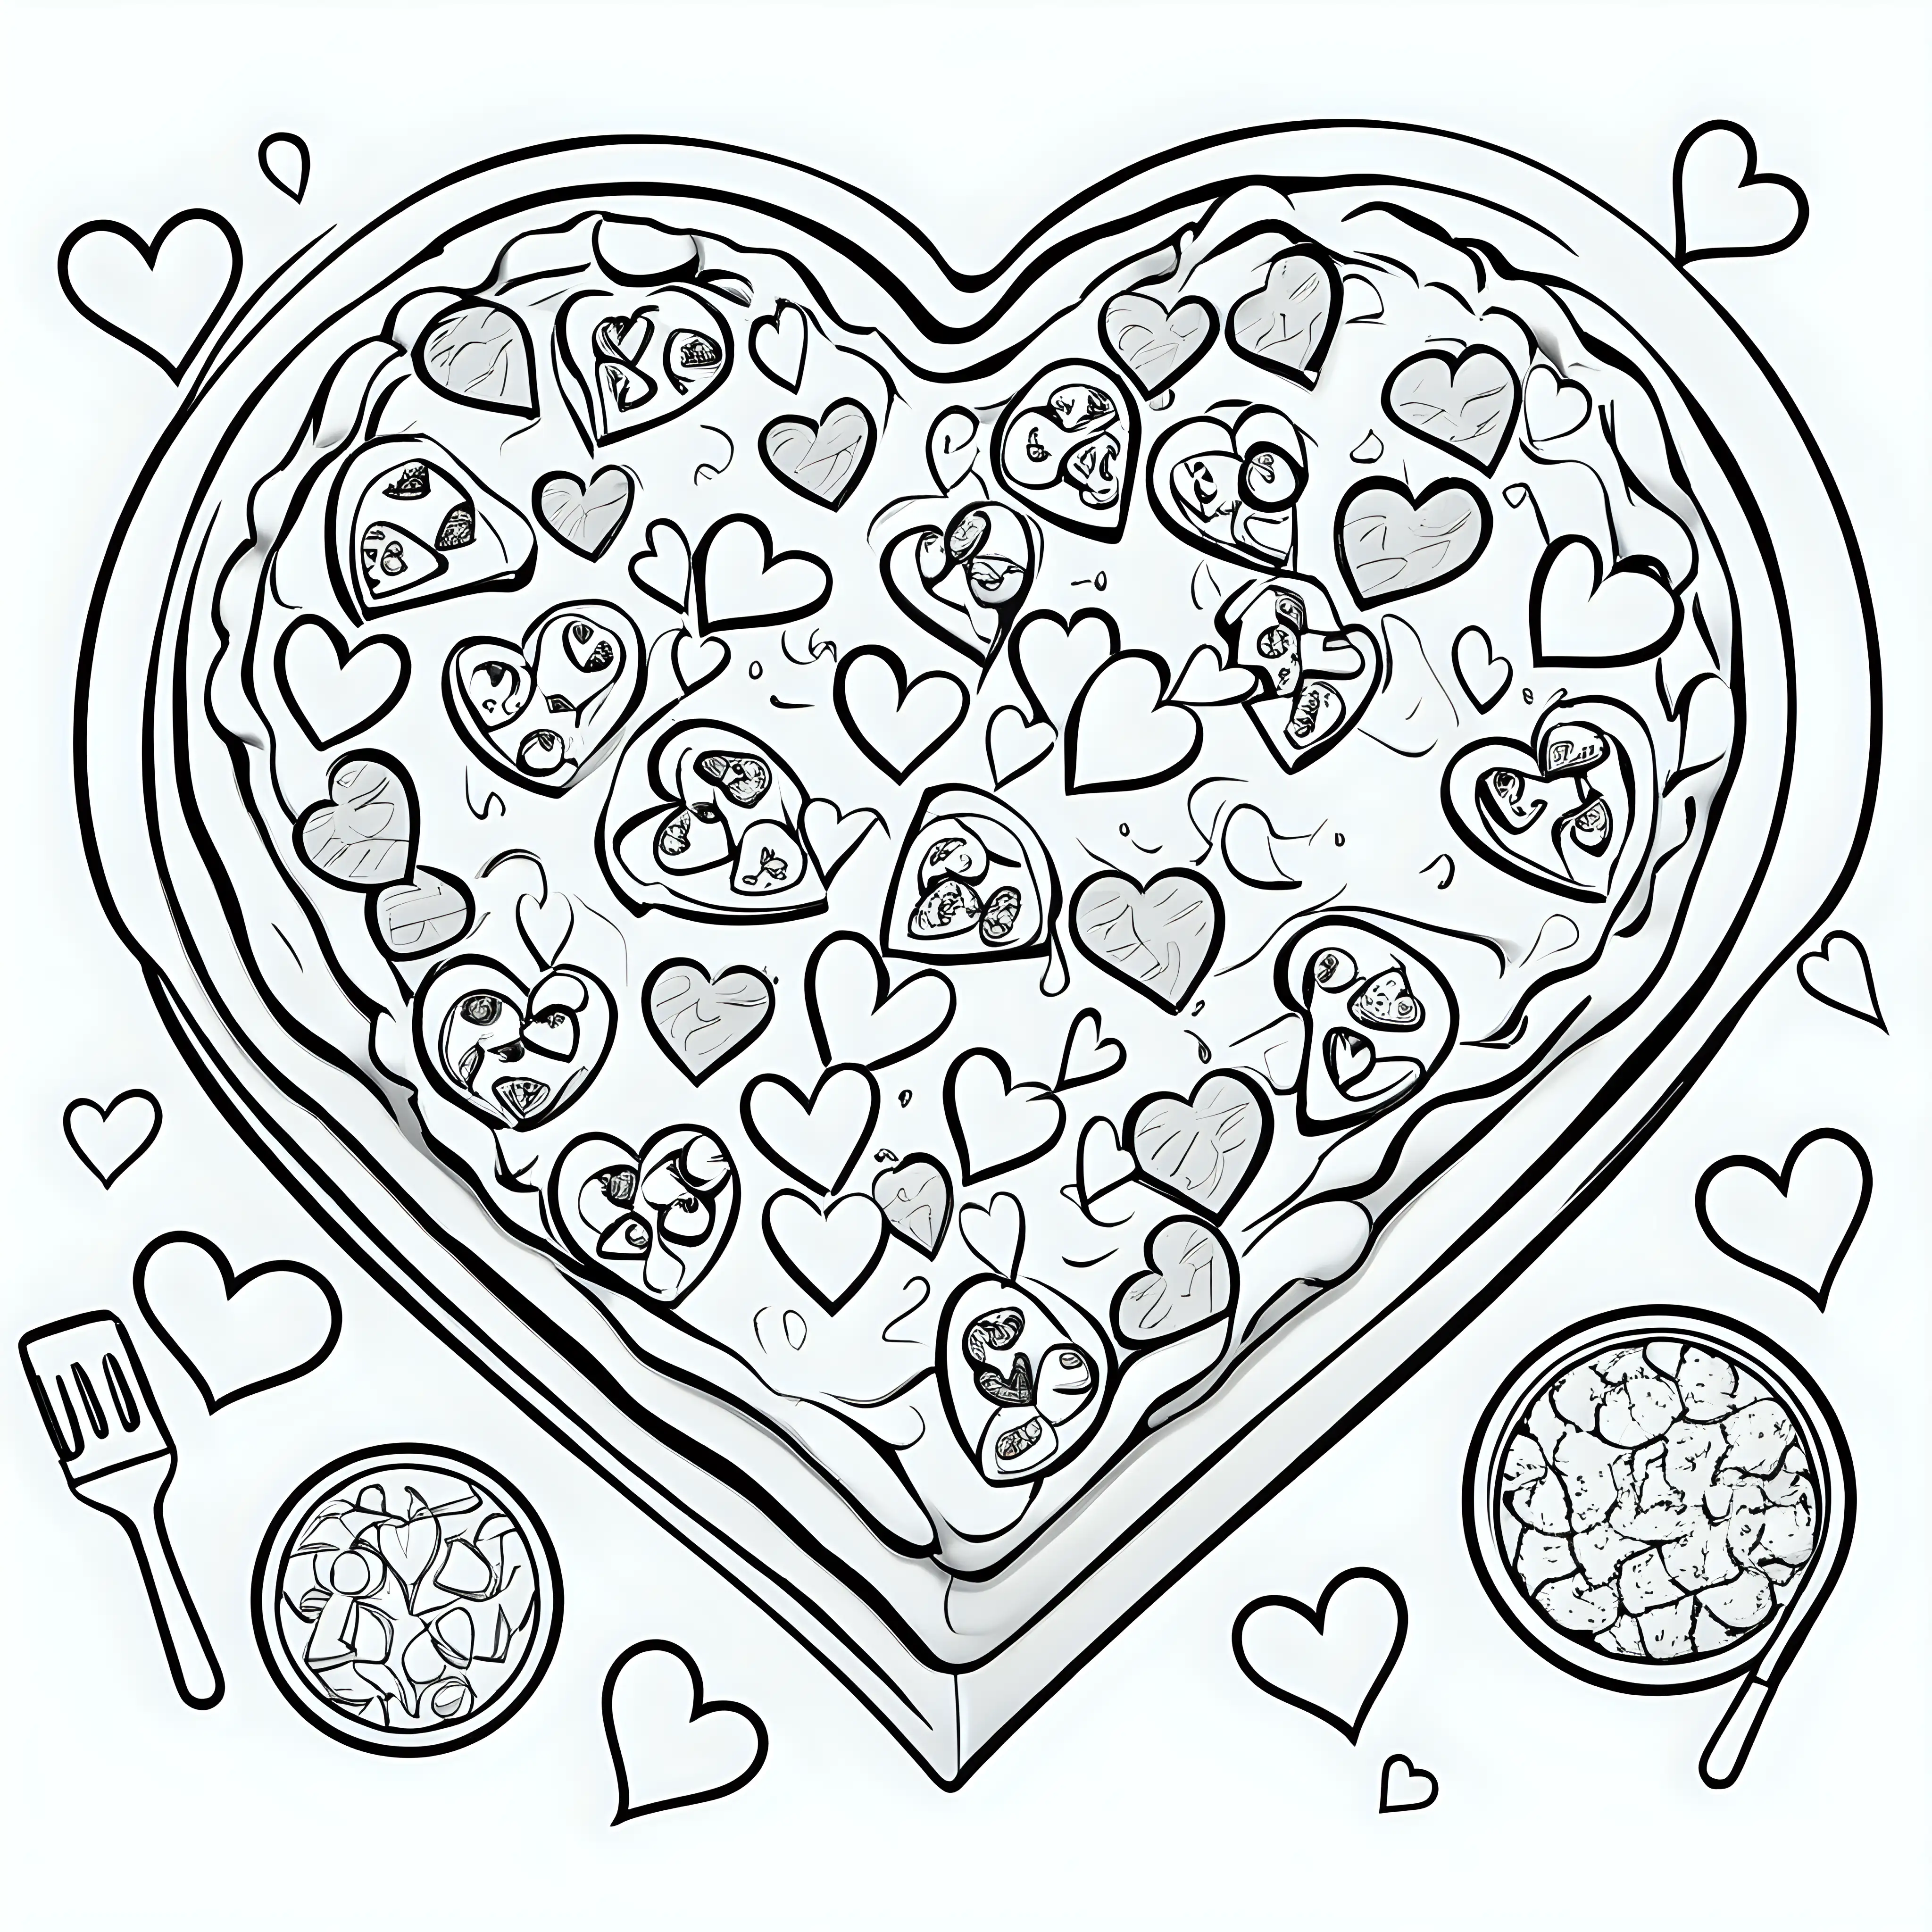 Create a coloring book page of Valentine's Day Pizza: Children making heart-shaped pizzas with various toppings. Include children who are Asian, black and Hispanic. Use crisp lines and white background. Make it an easy-to-color design for children. --ar 17:22--model raw